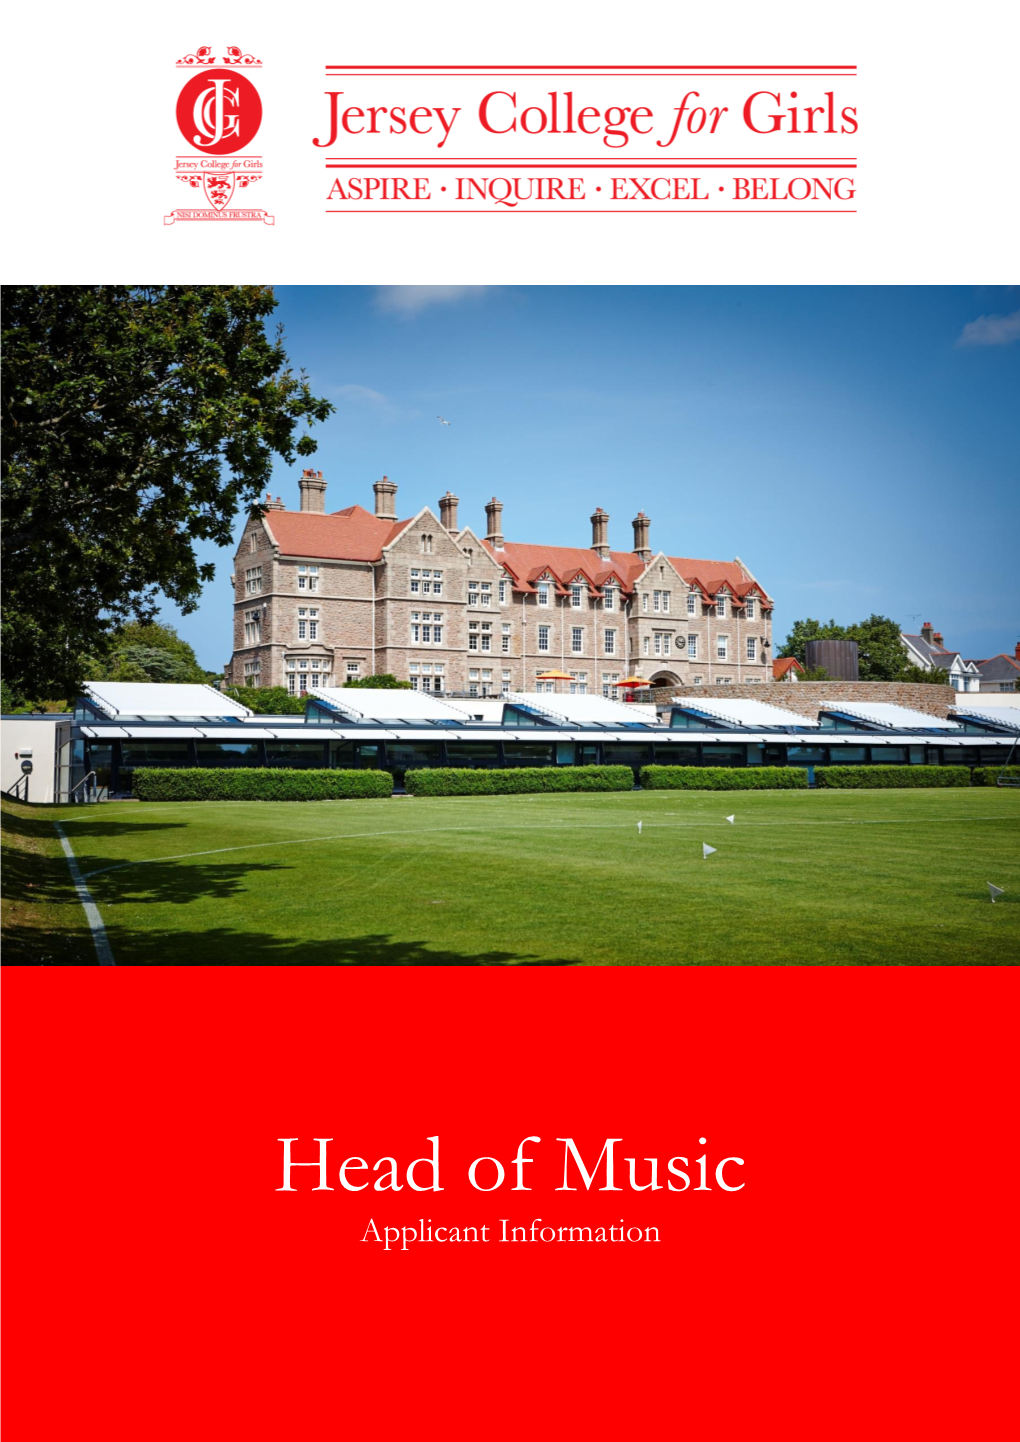 Head of Music Applicant Information